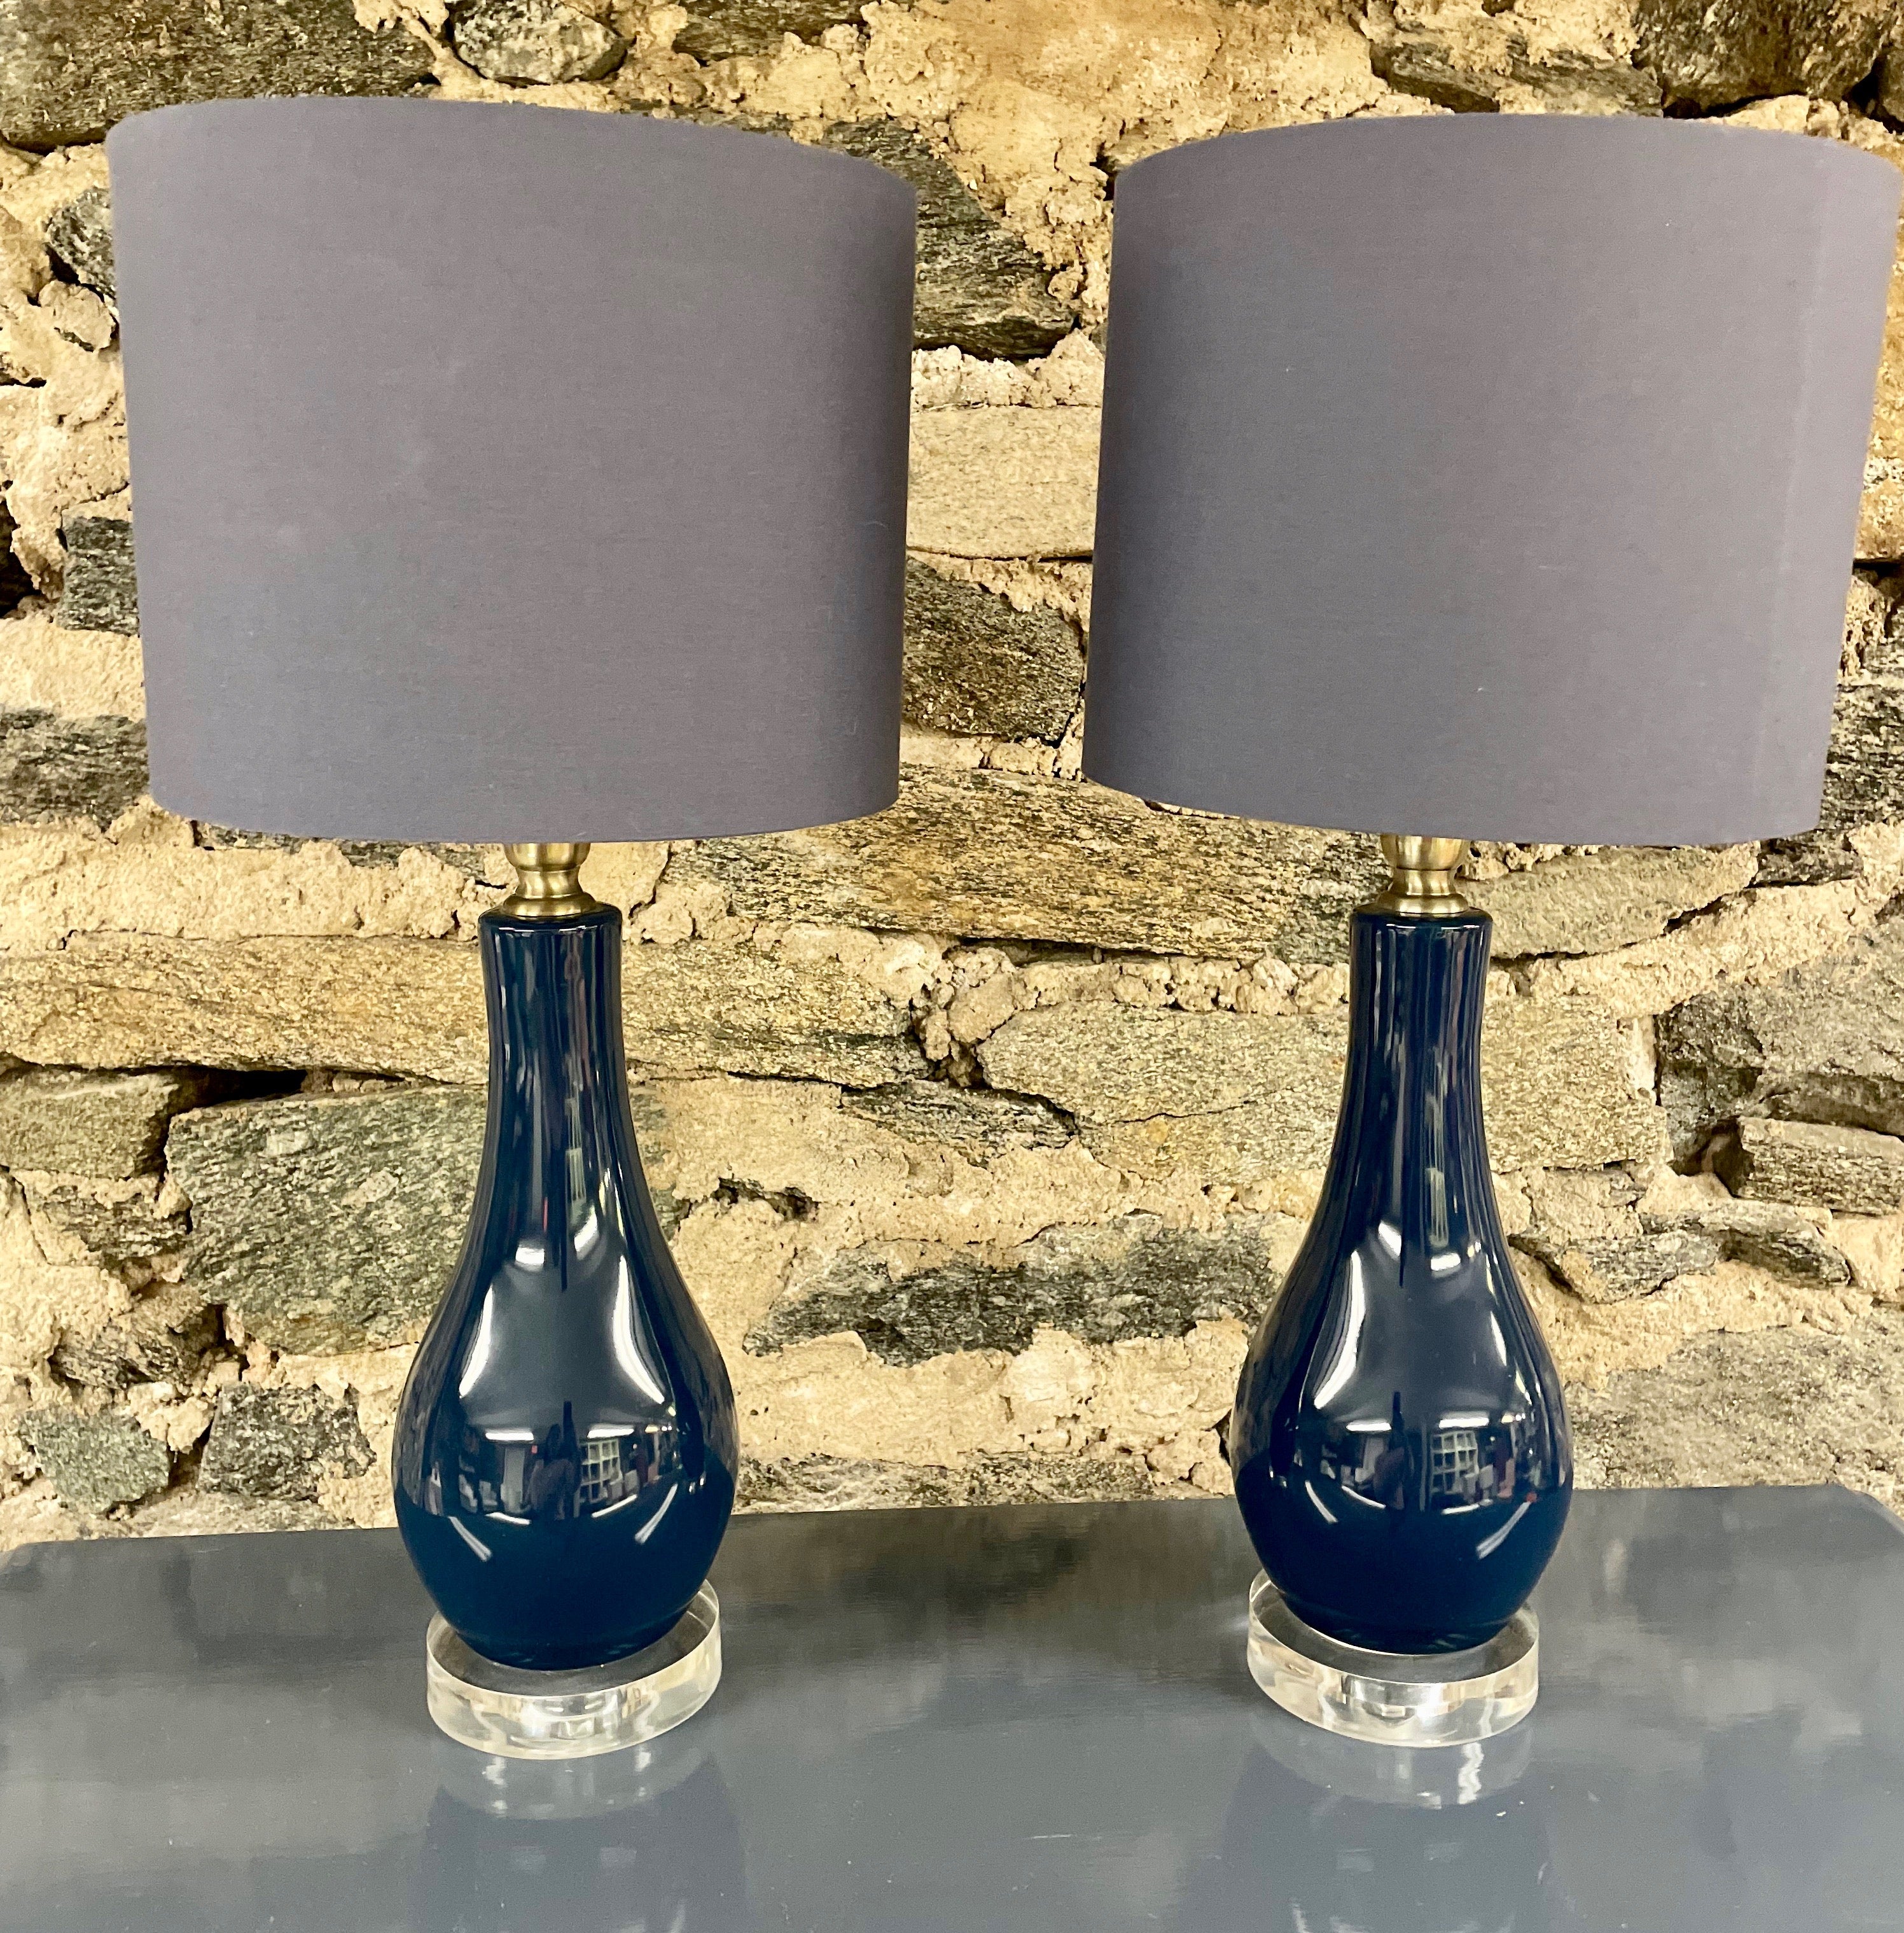 Pair of Blue Urn Shaped Lamps with Lucite Bases